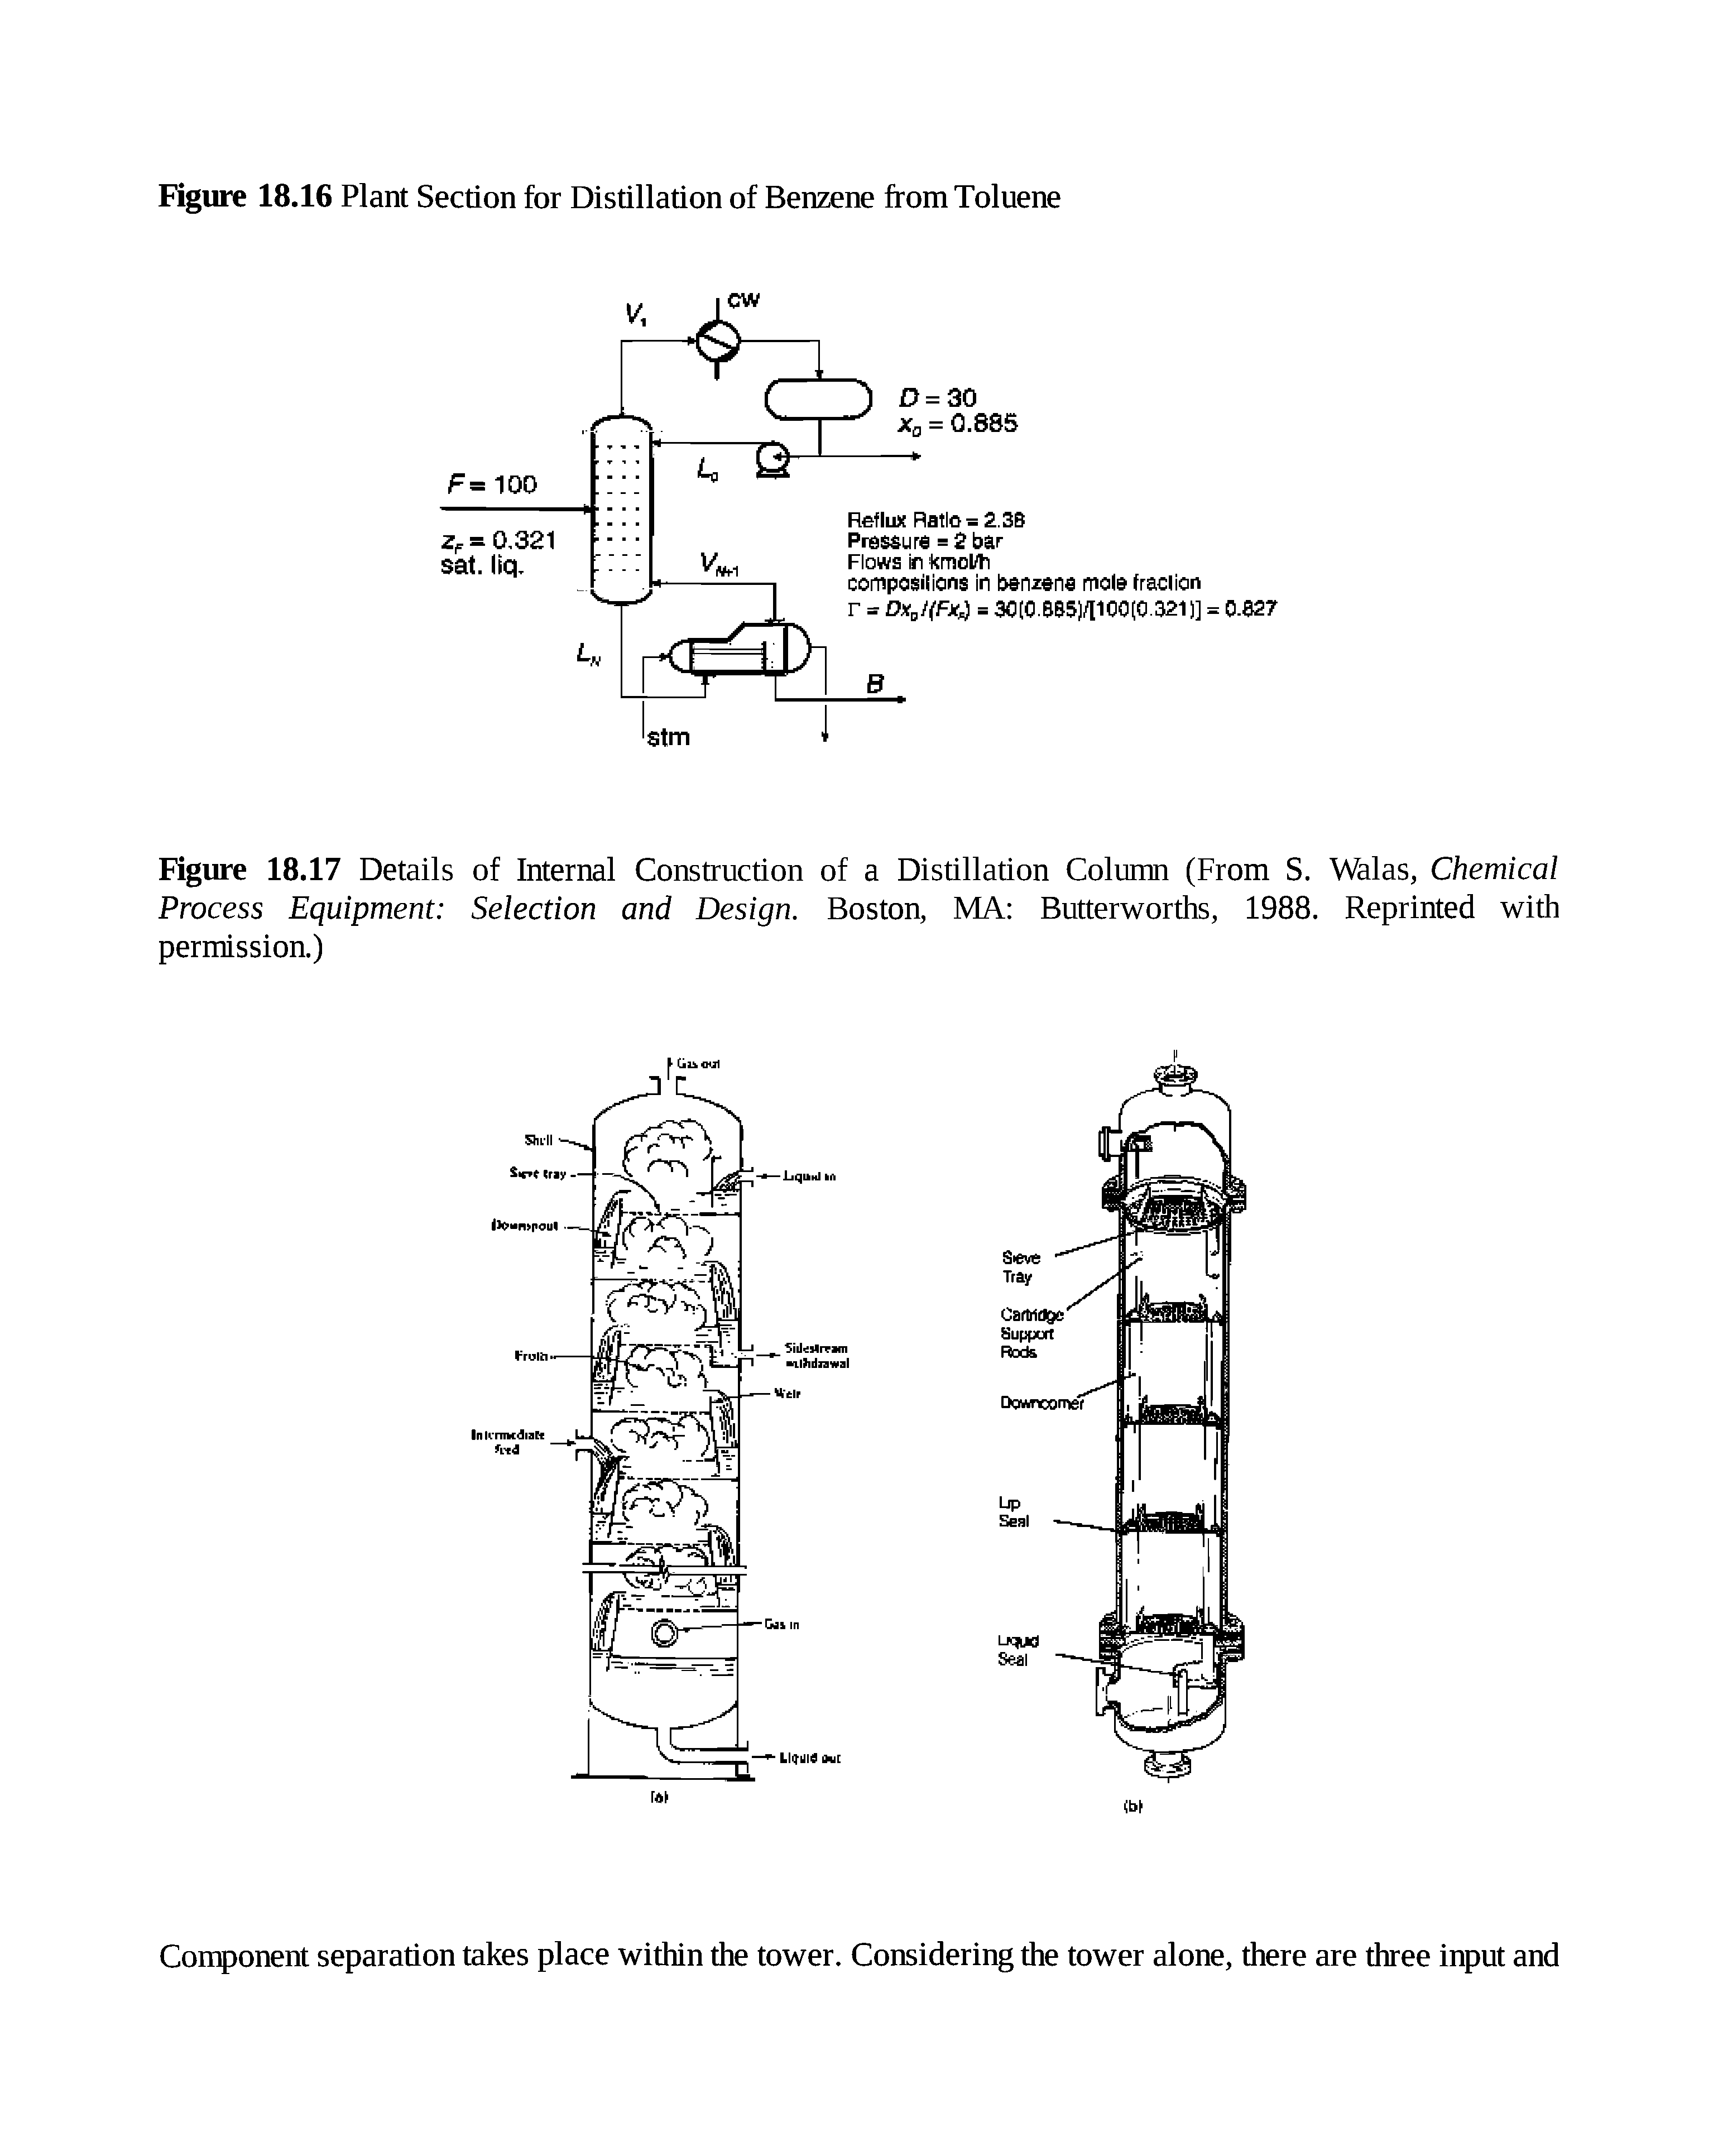 Figure 18.17 Details of Internal Construction of a Distillation Column (From S. Walas, Chemical Process Equipment Selection and Design. Boston, MA Butterworths, 1988. Reprinted with permission.)...